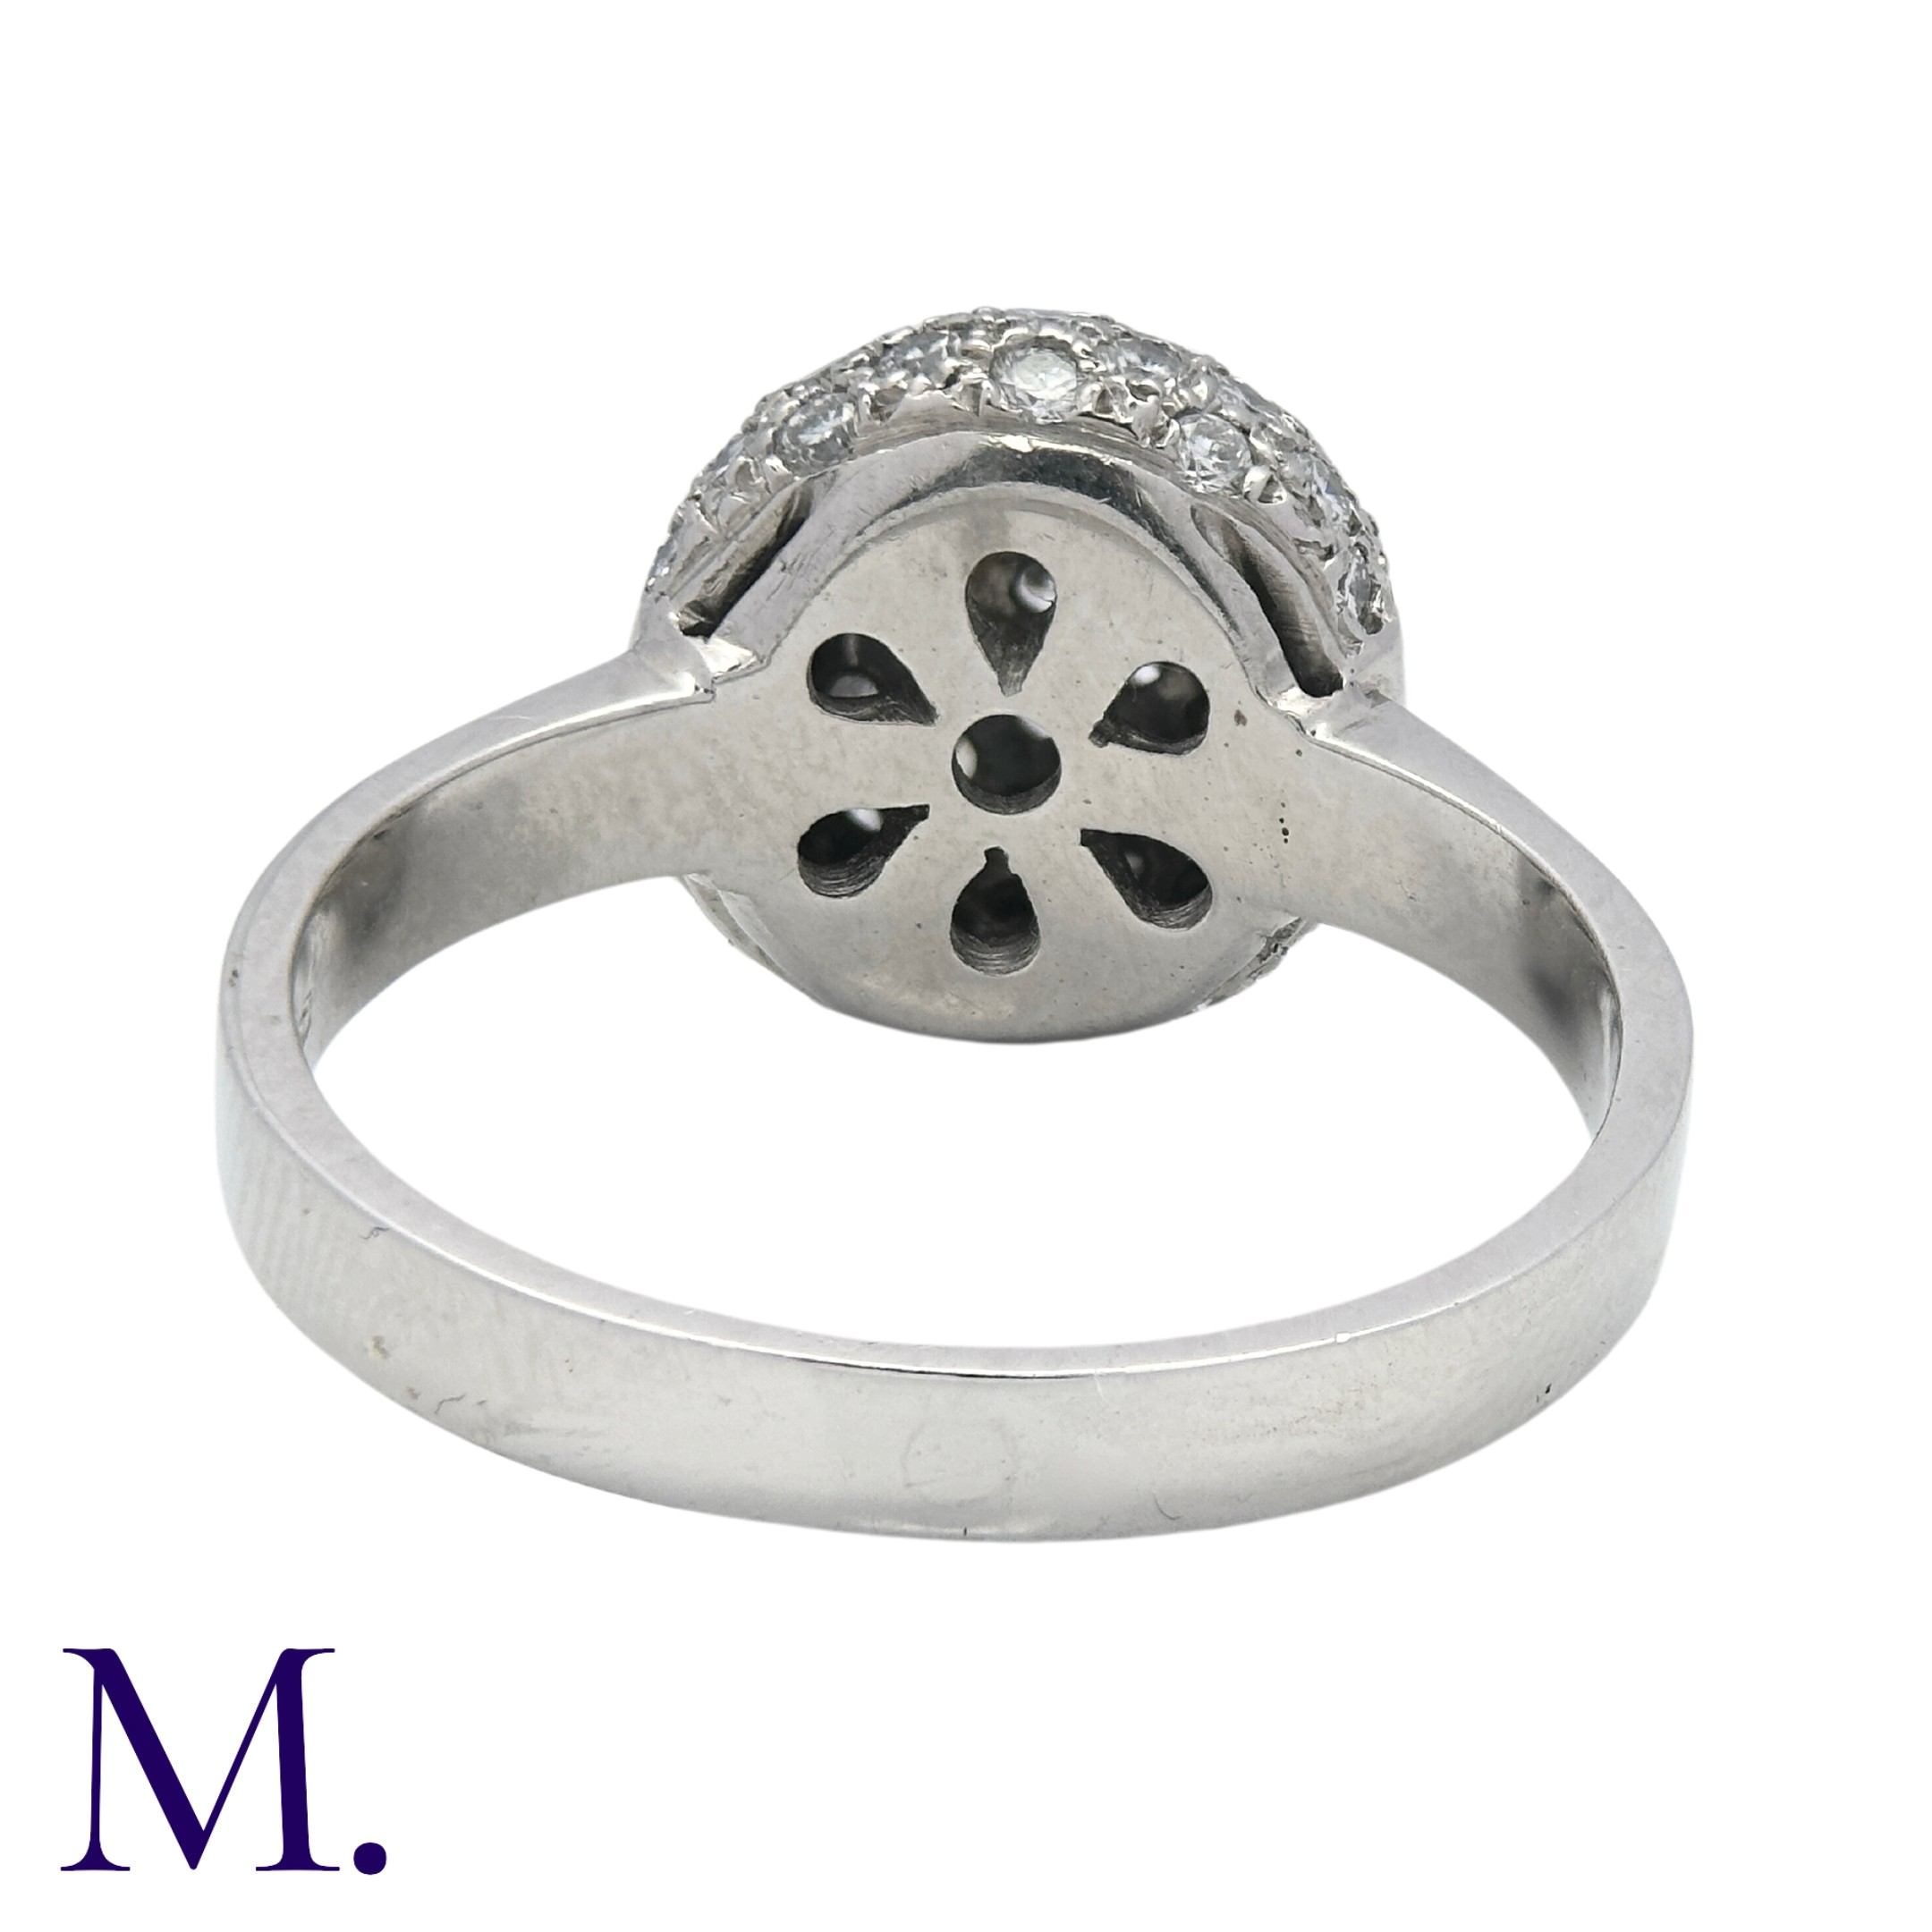 A Diamond Ball Cluster Ring in 18K white gold, set with approximately 1.5ct of brilliant cut - Image 5 of 5